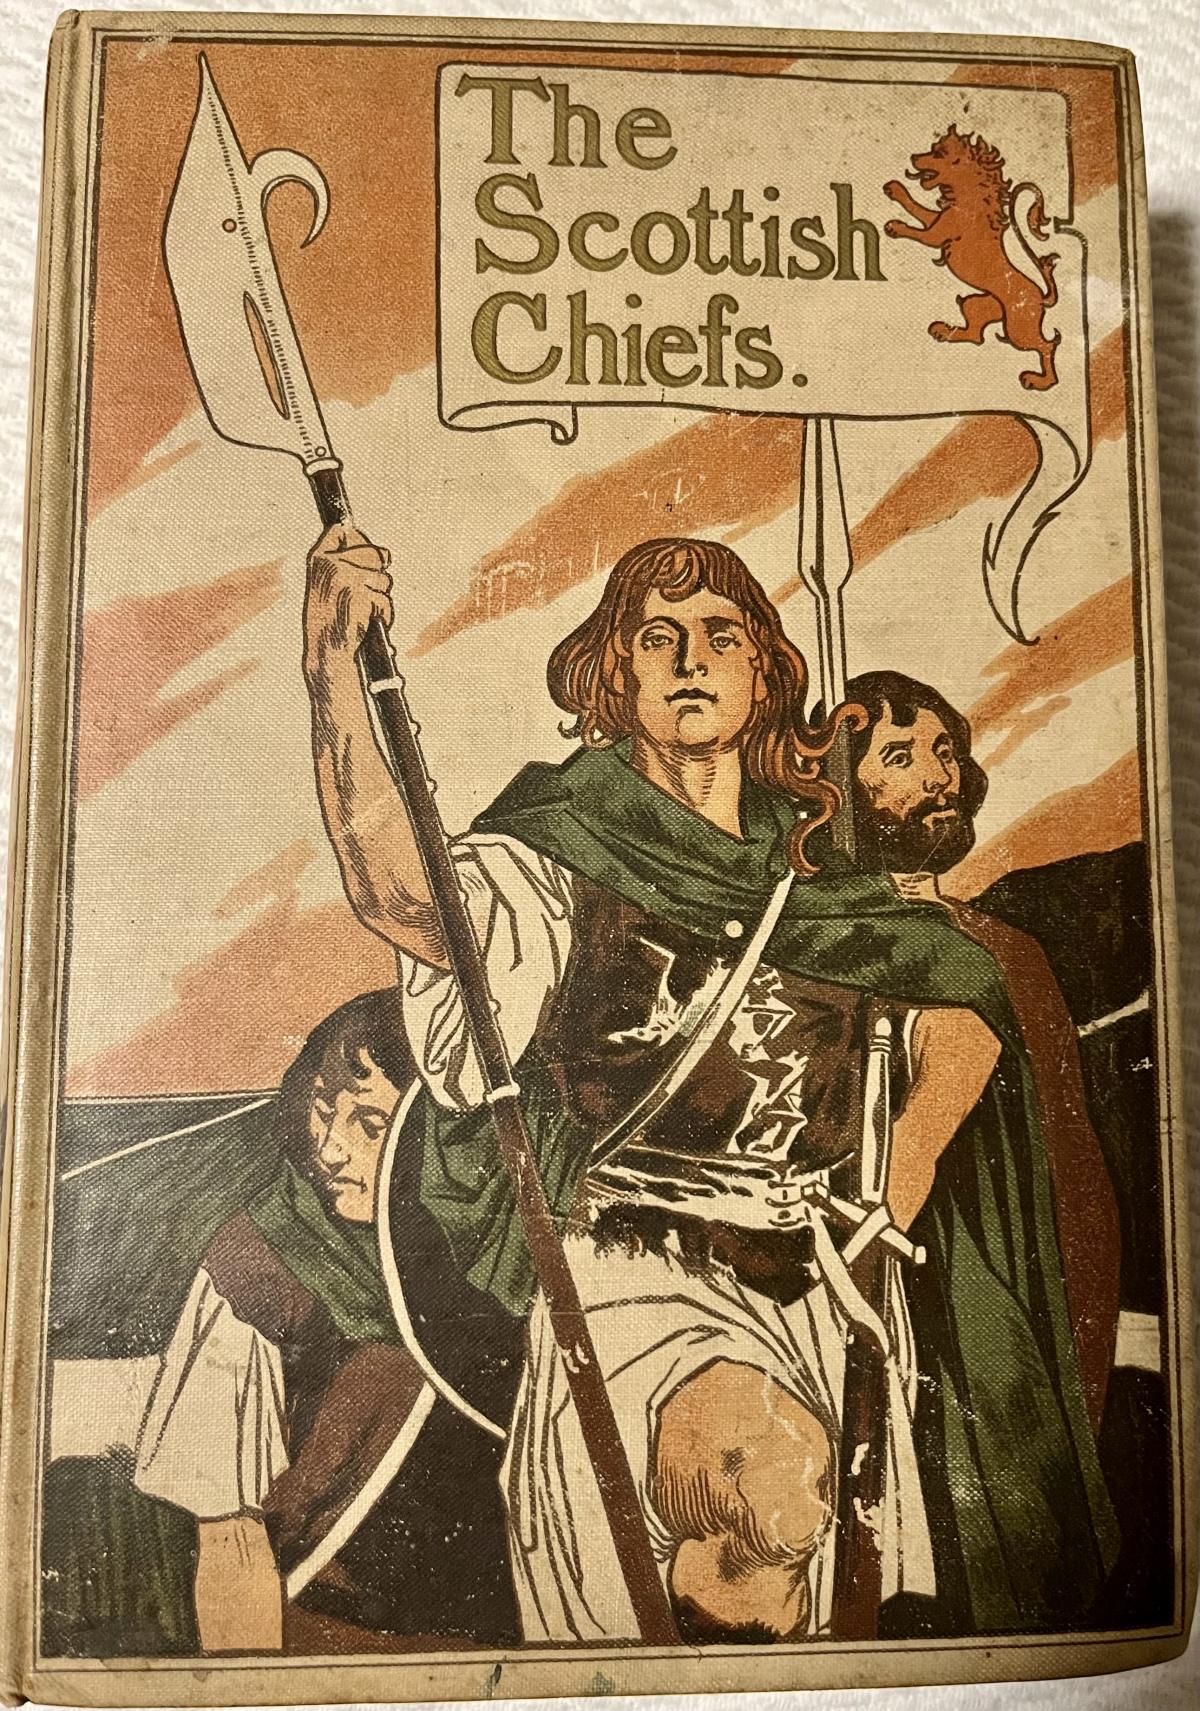 Book cover with drawings of ancient Scottish warriors